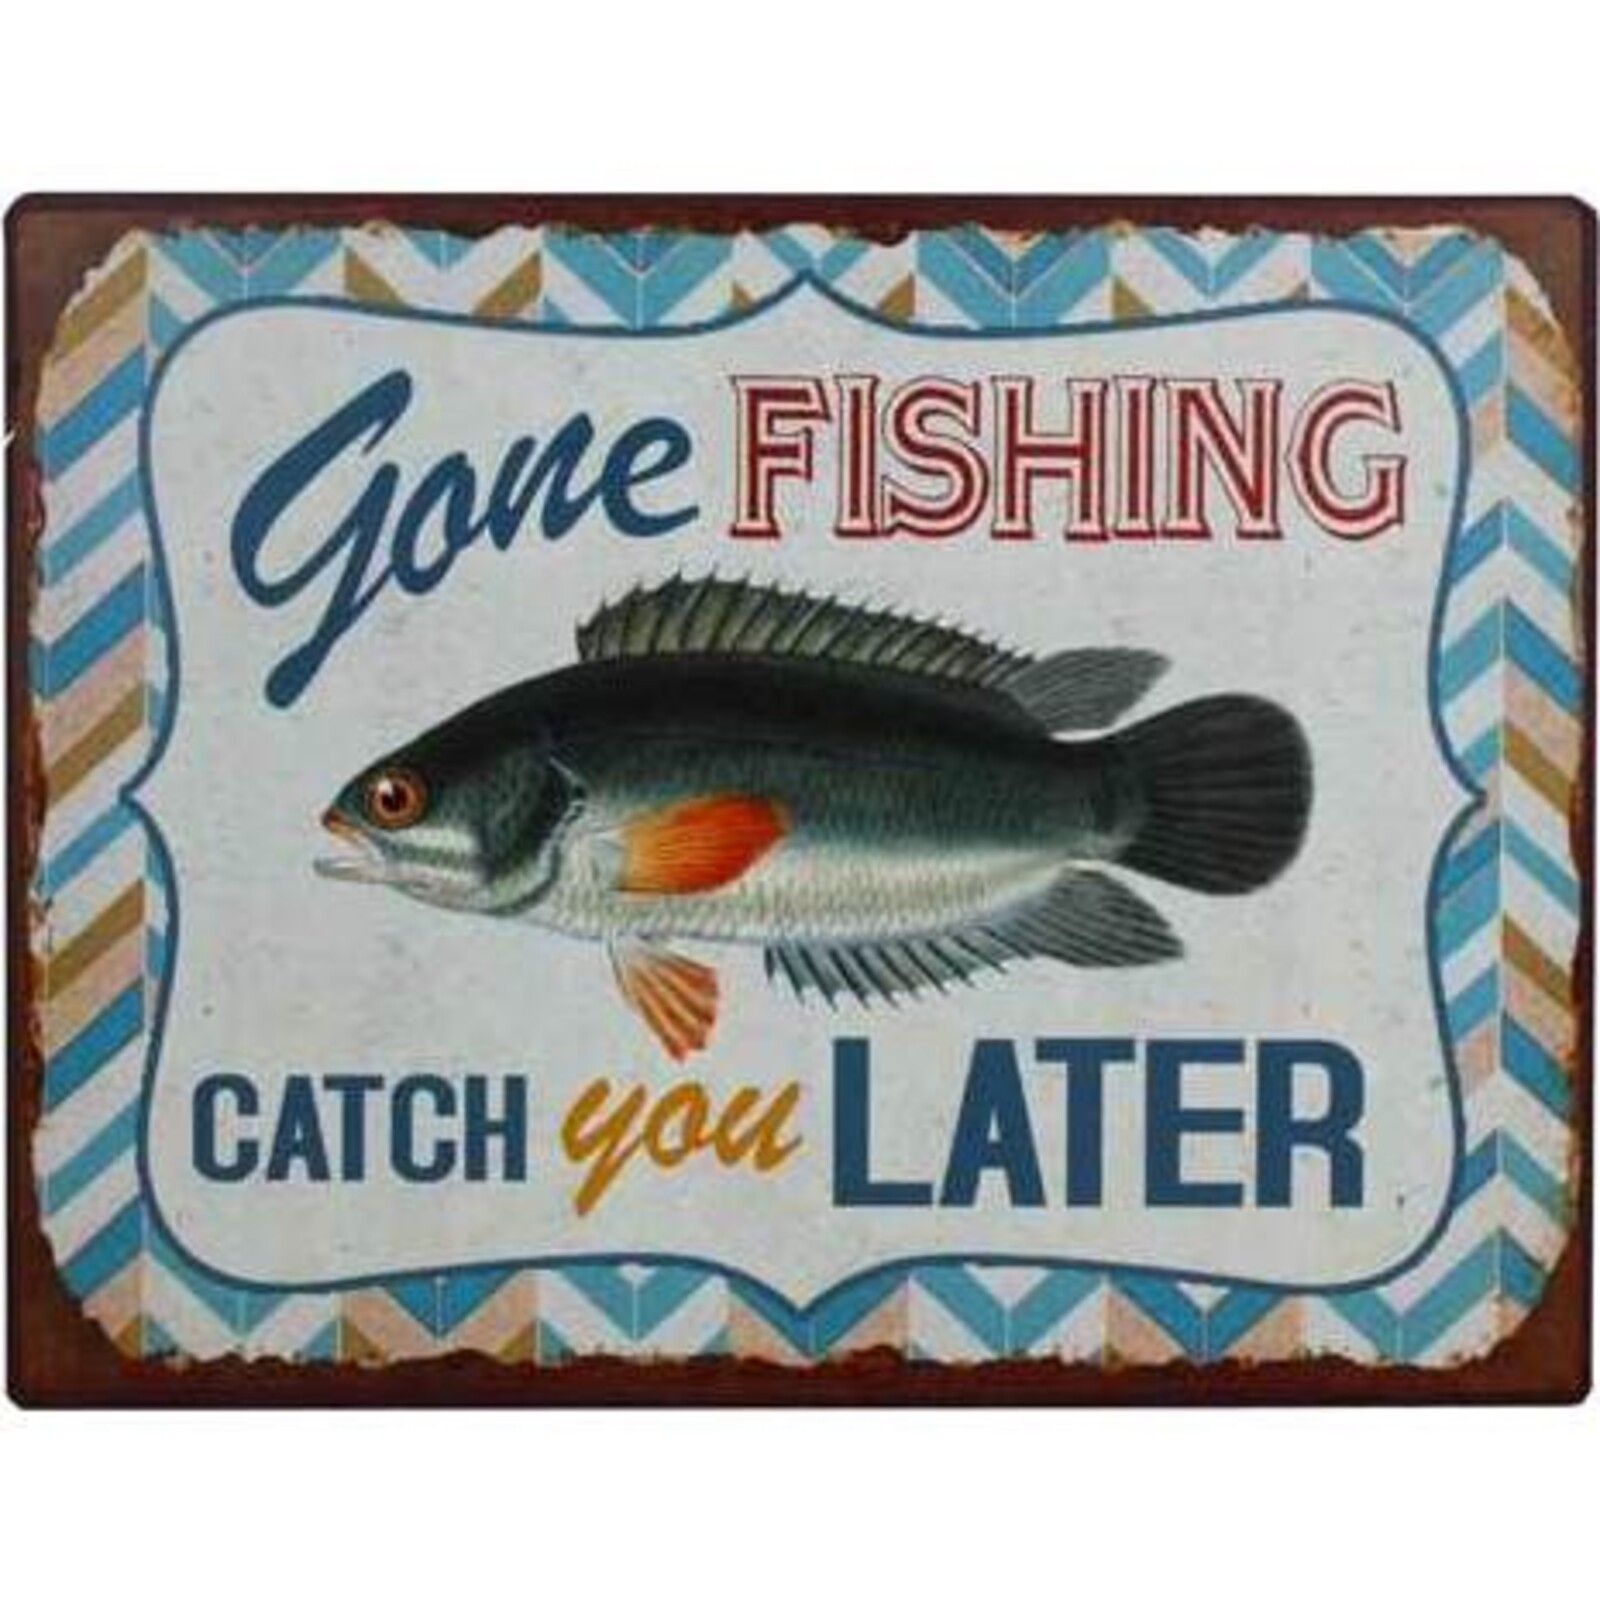 Sign Fish Later